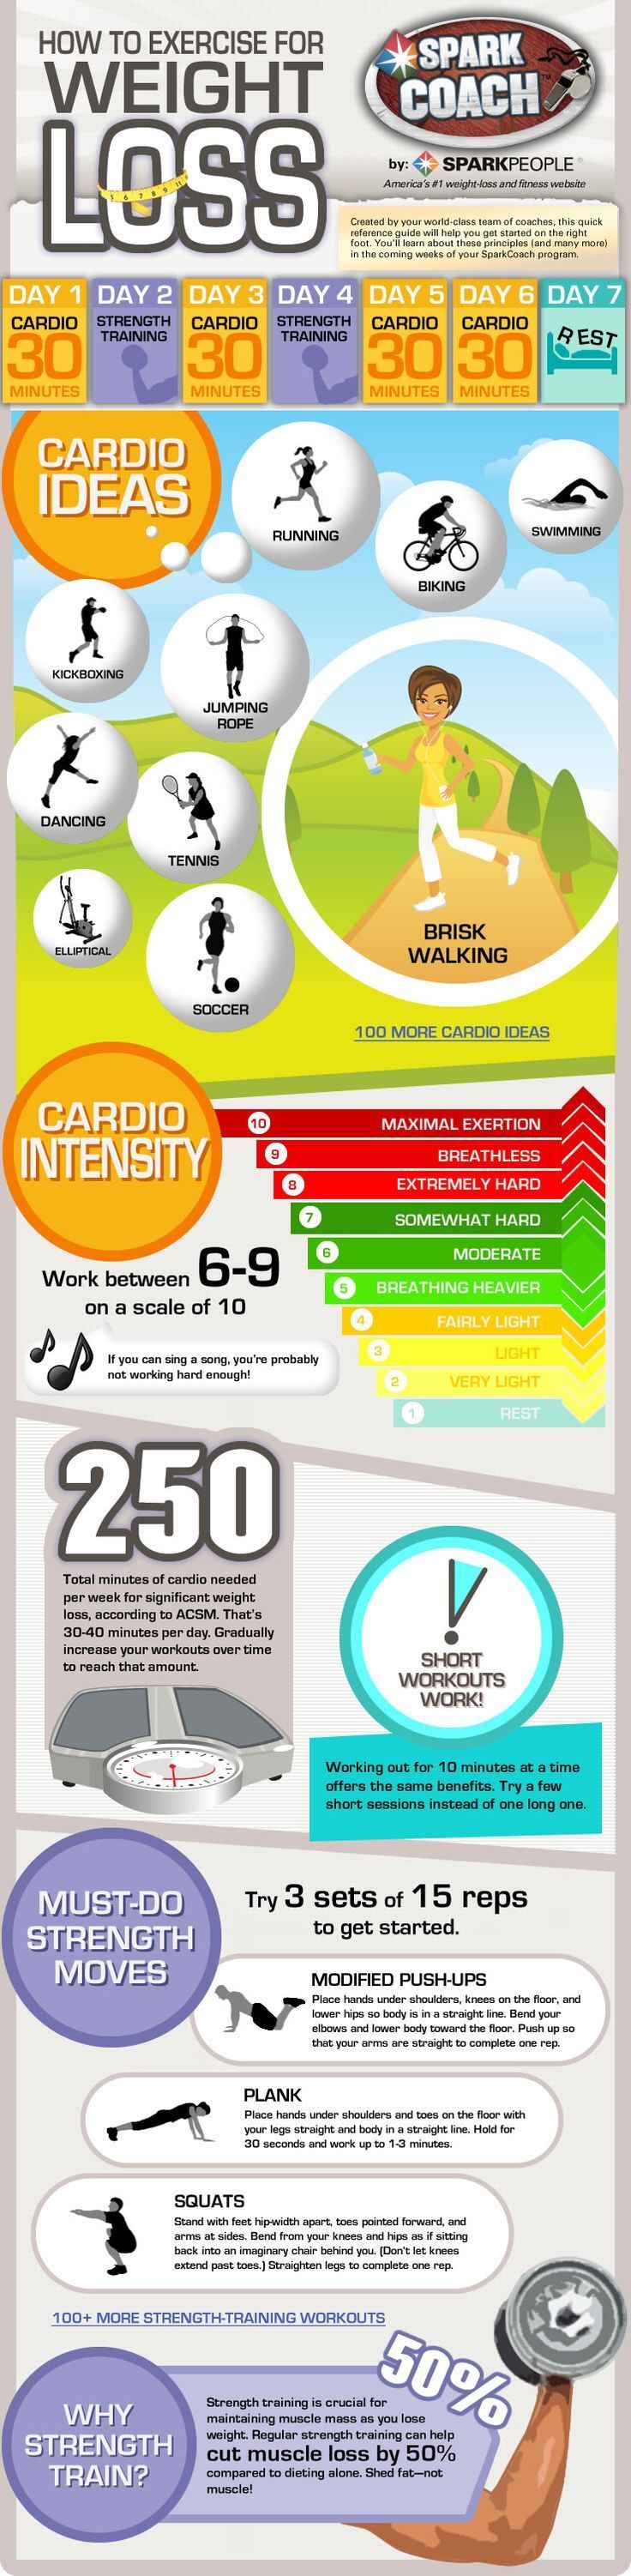 How to exercise for weight loss (Infographic) ———- Bonus: 5 Best Exercises